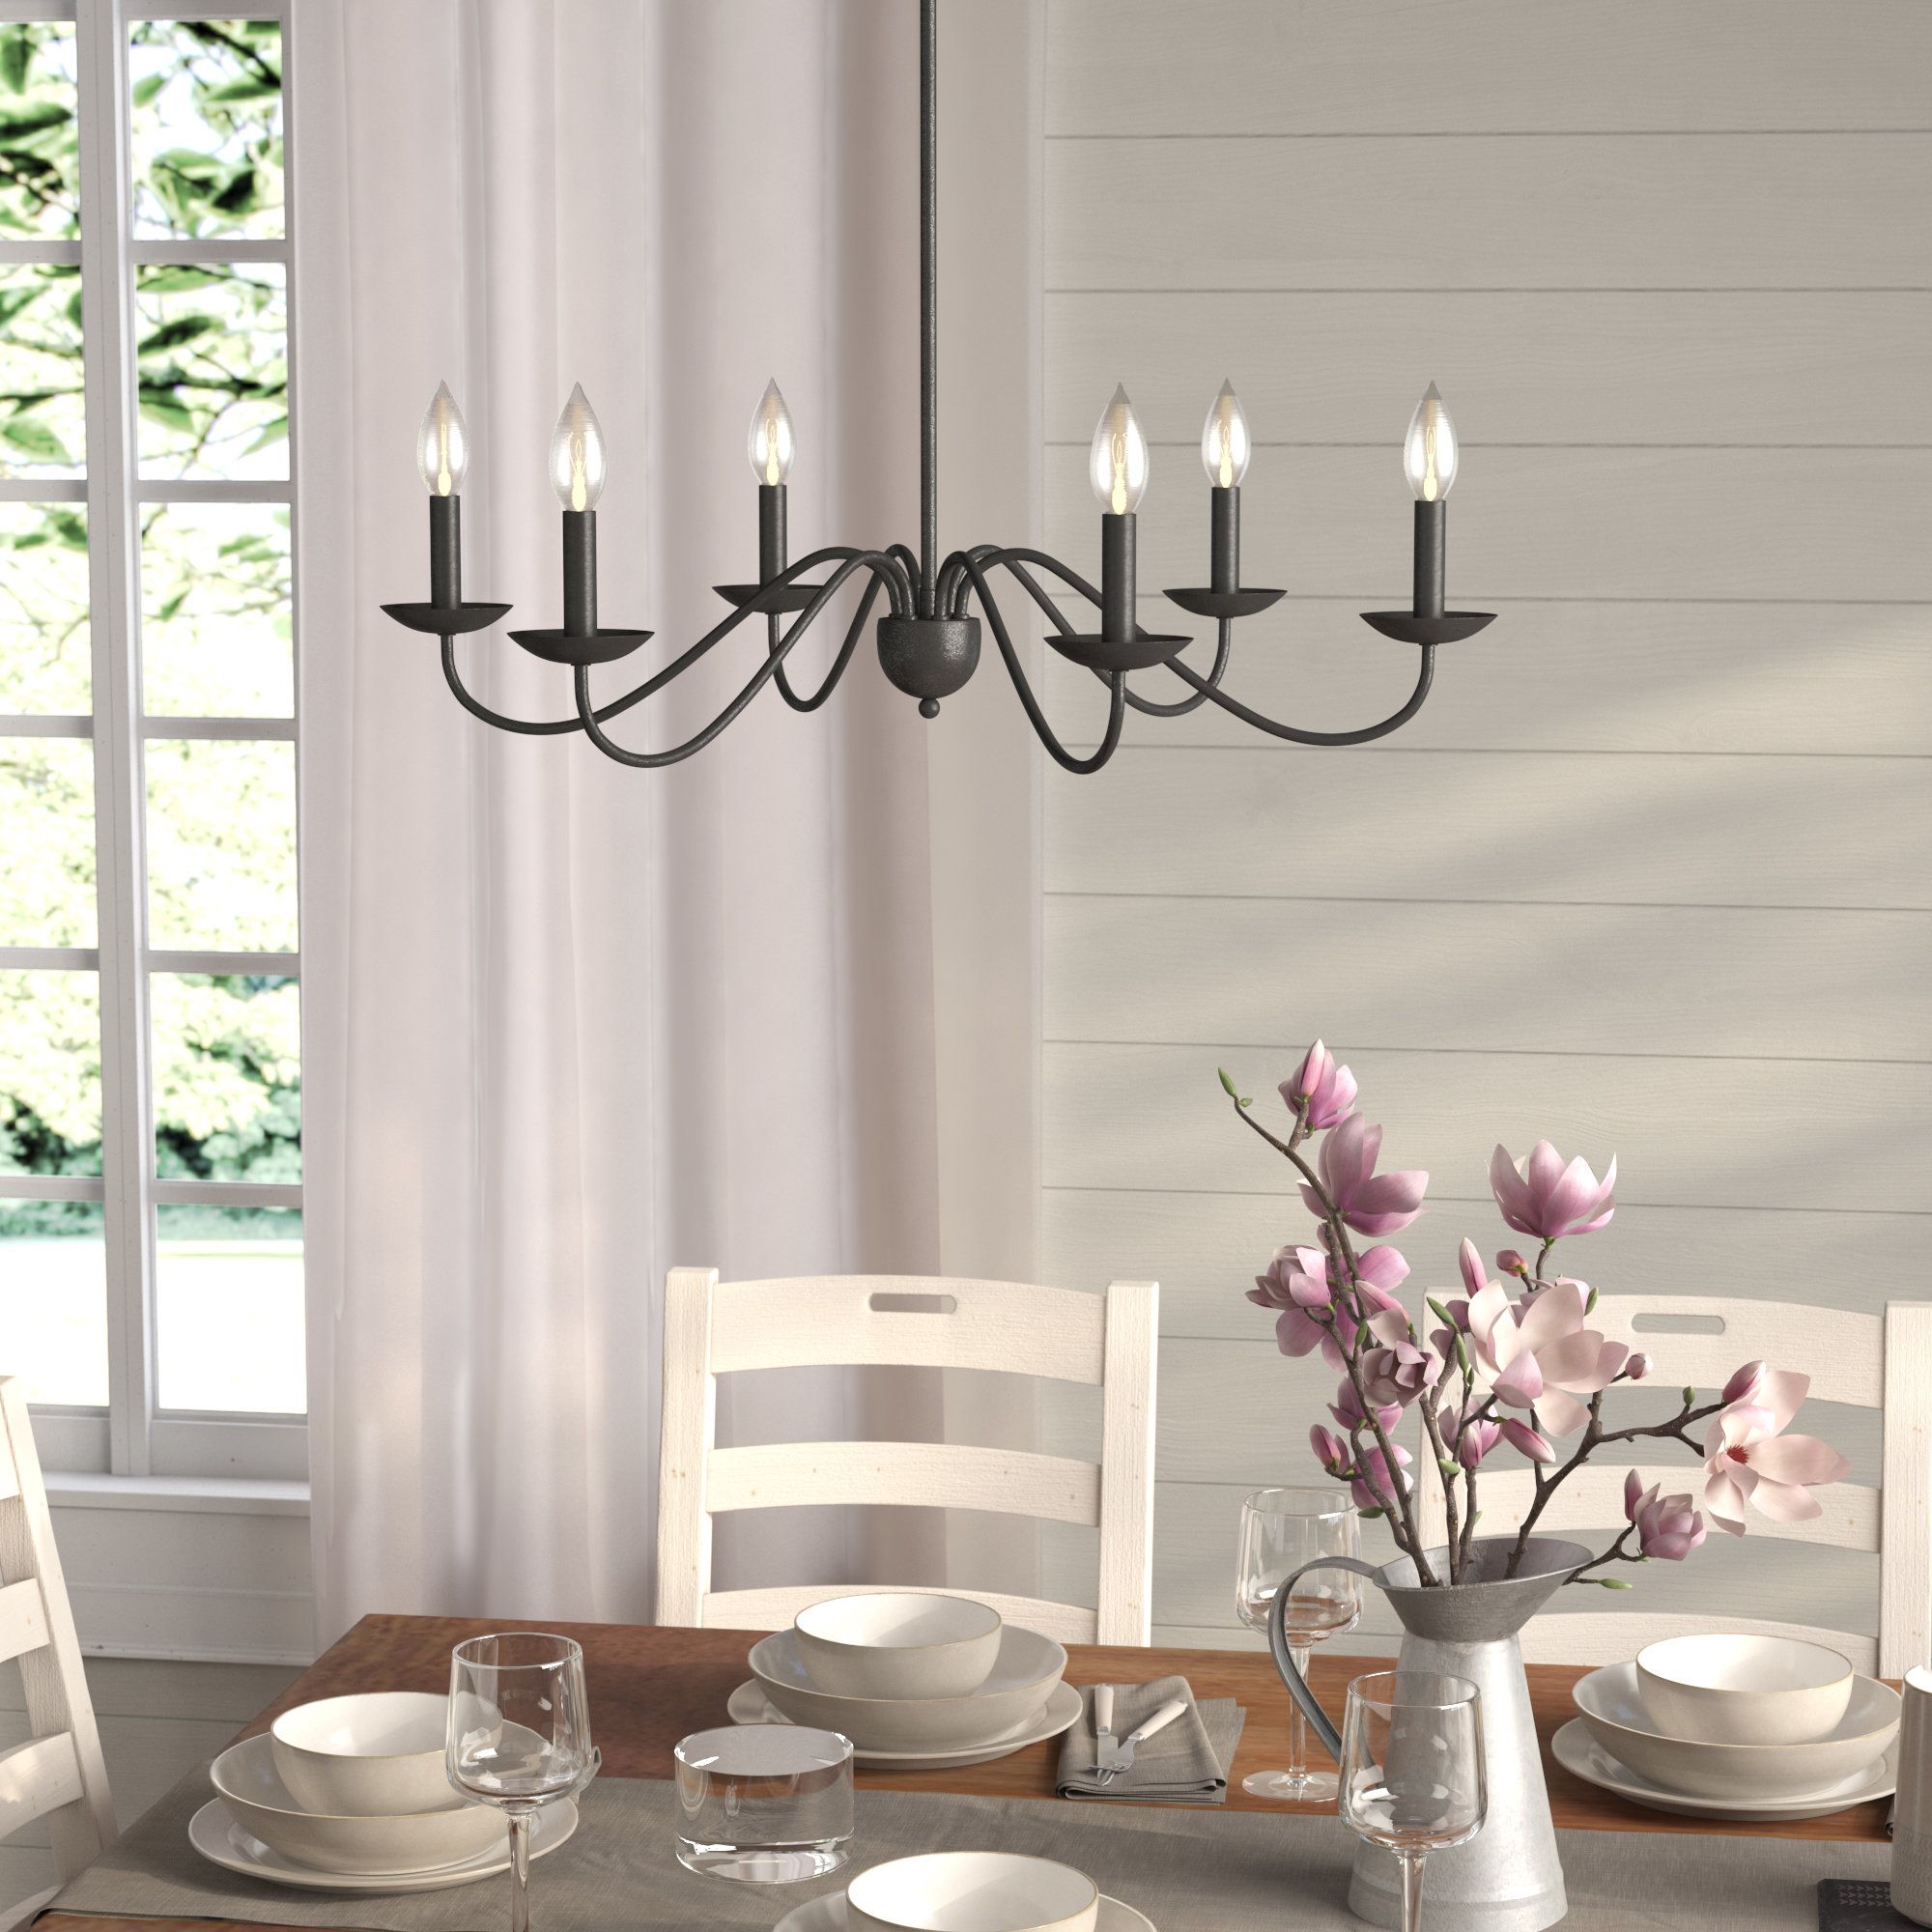 Recent Perseus 6 Light Candle Style Chandelier Intended For Perseus 6 Light Candle Style Chandeliers (View 1 of 20)